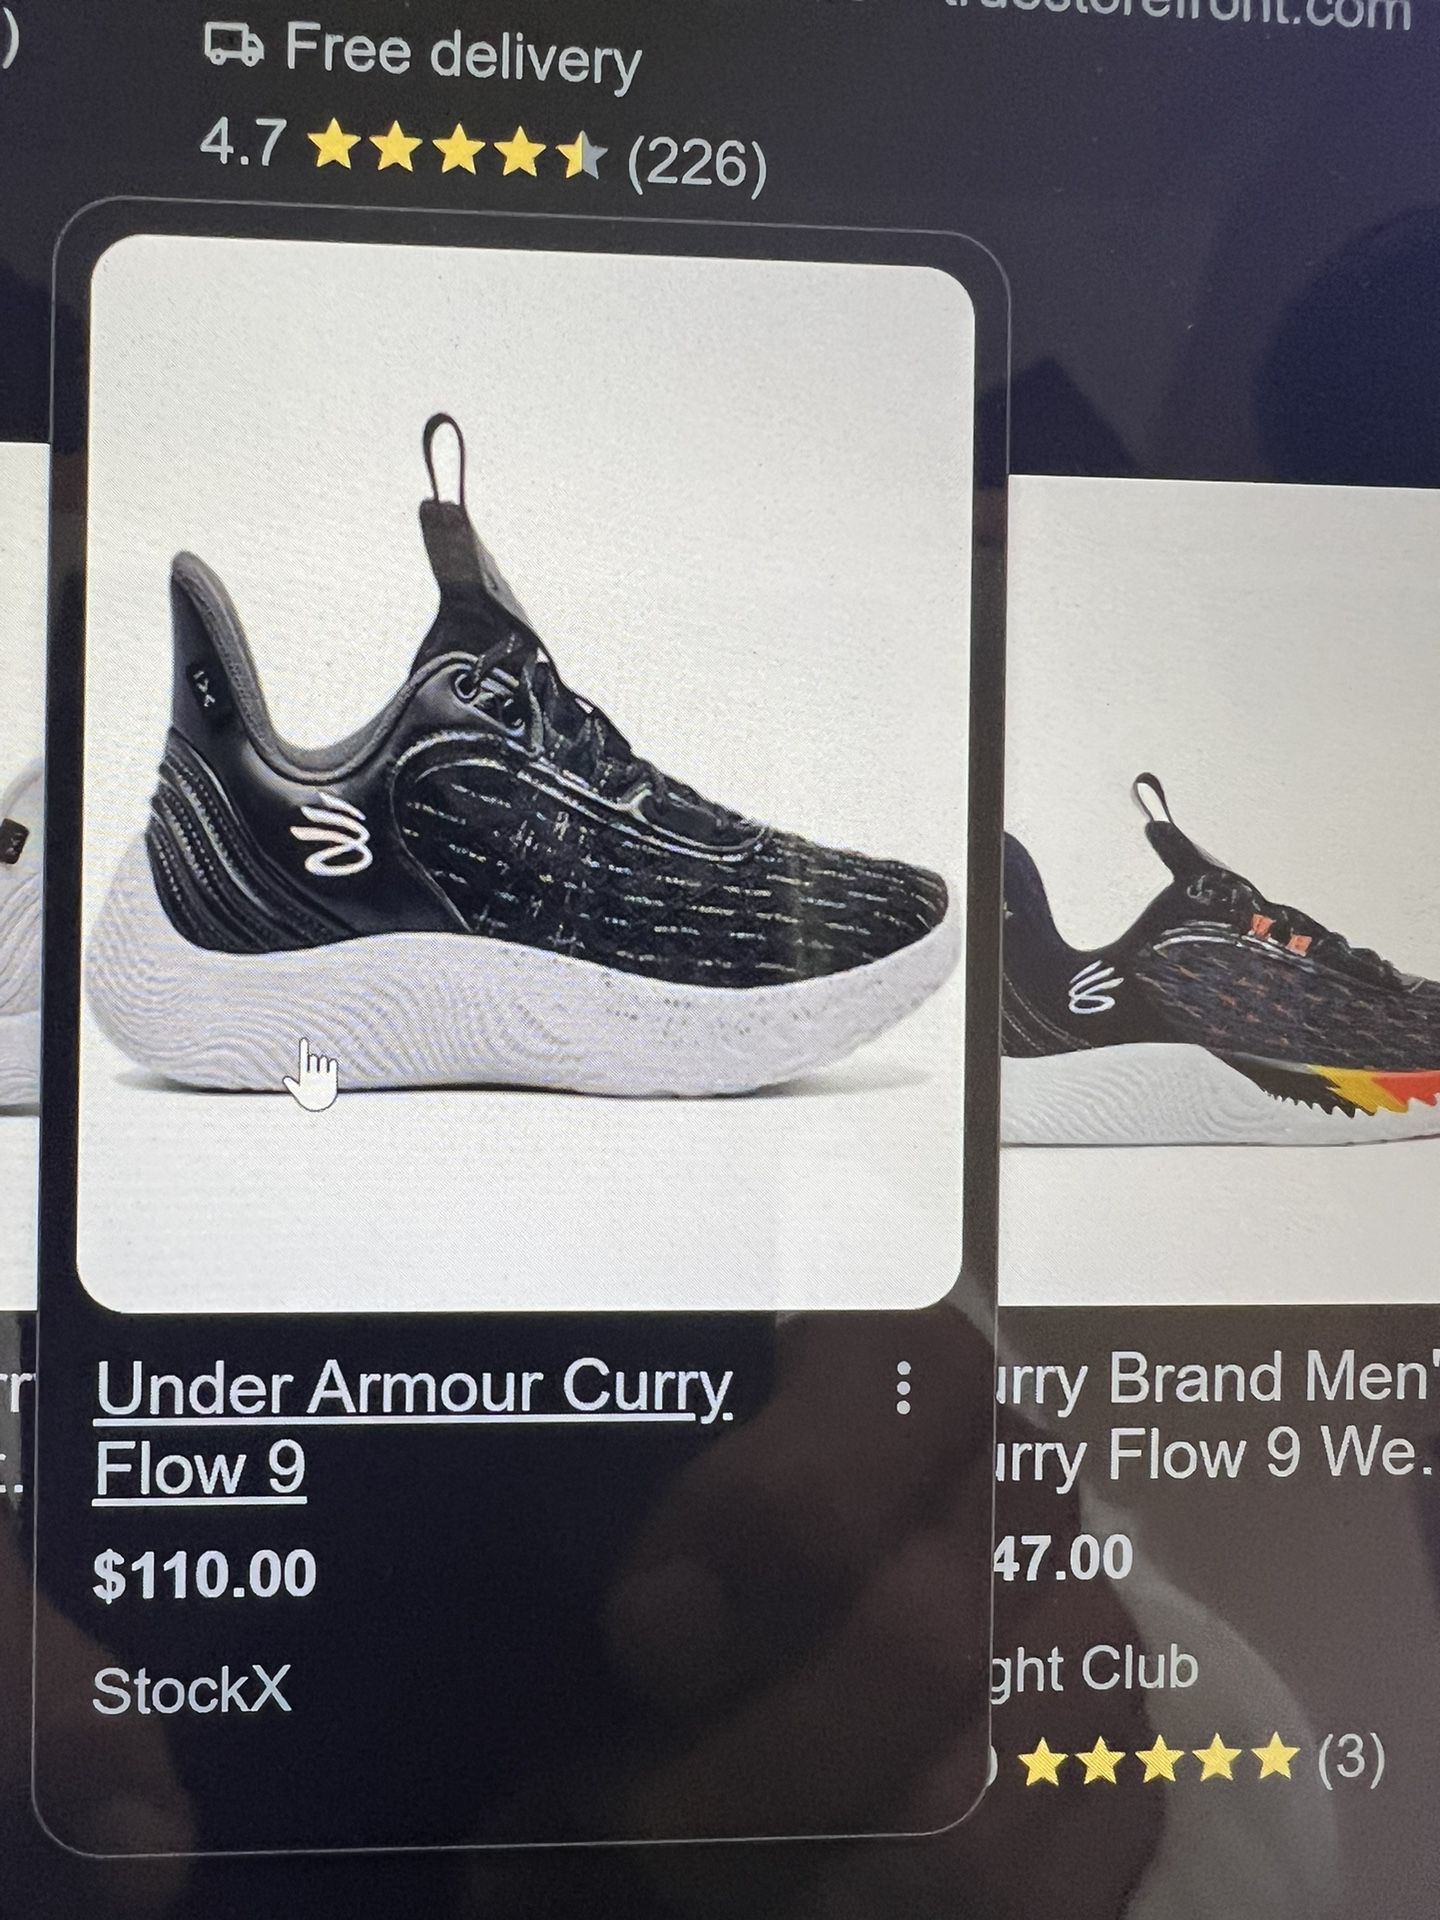 Under Armour Curry’s 